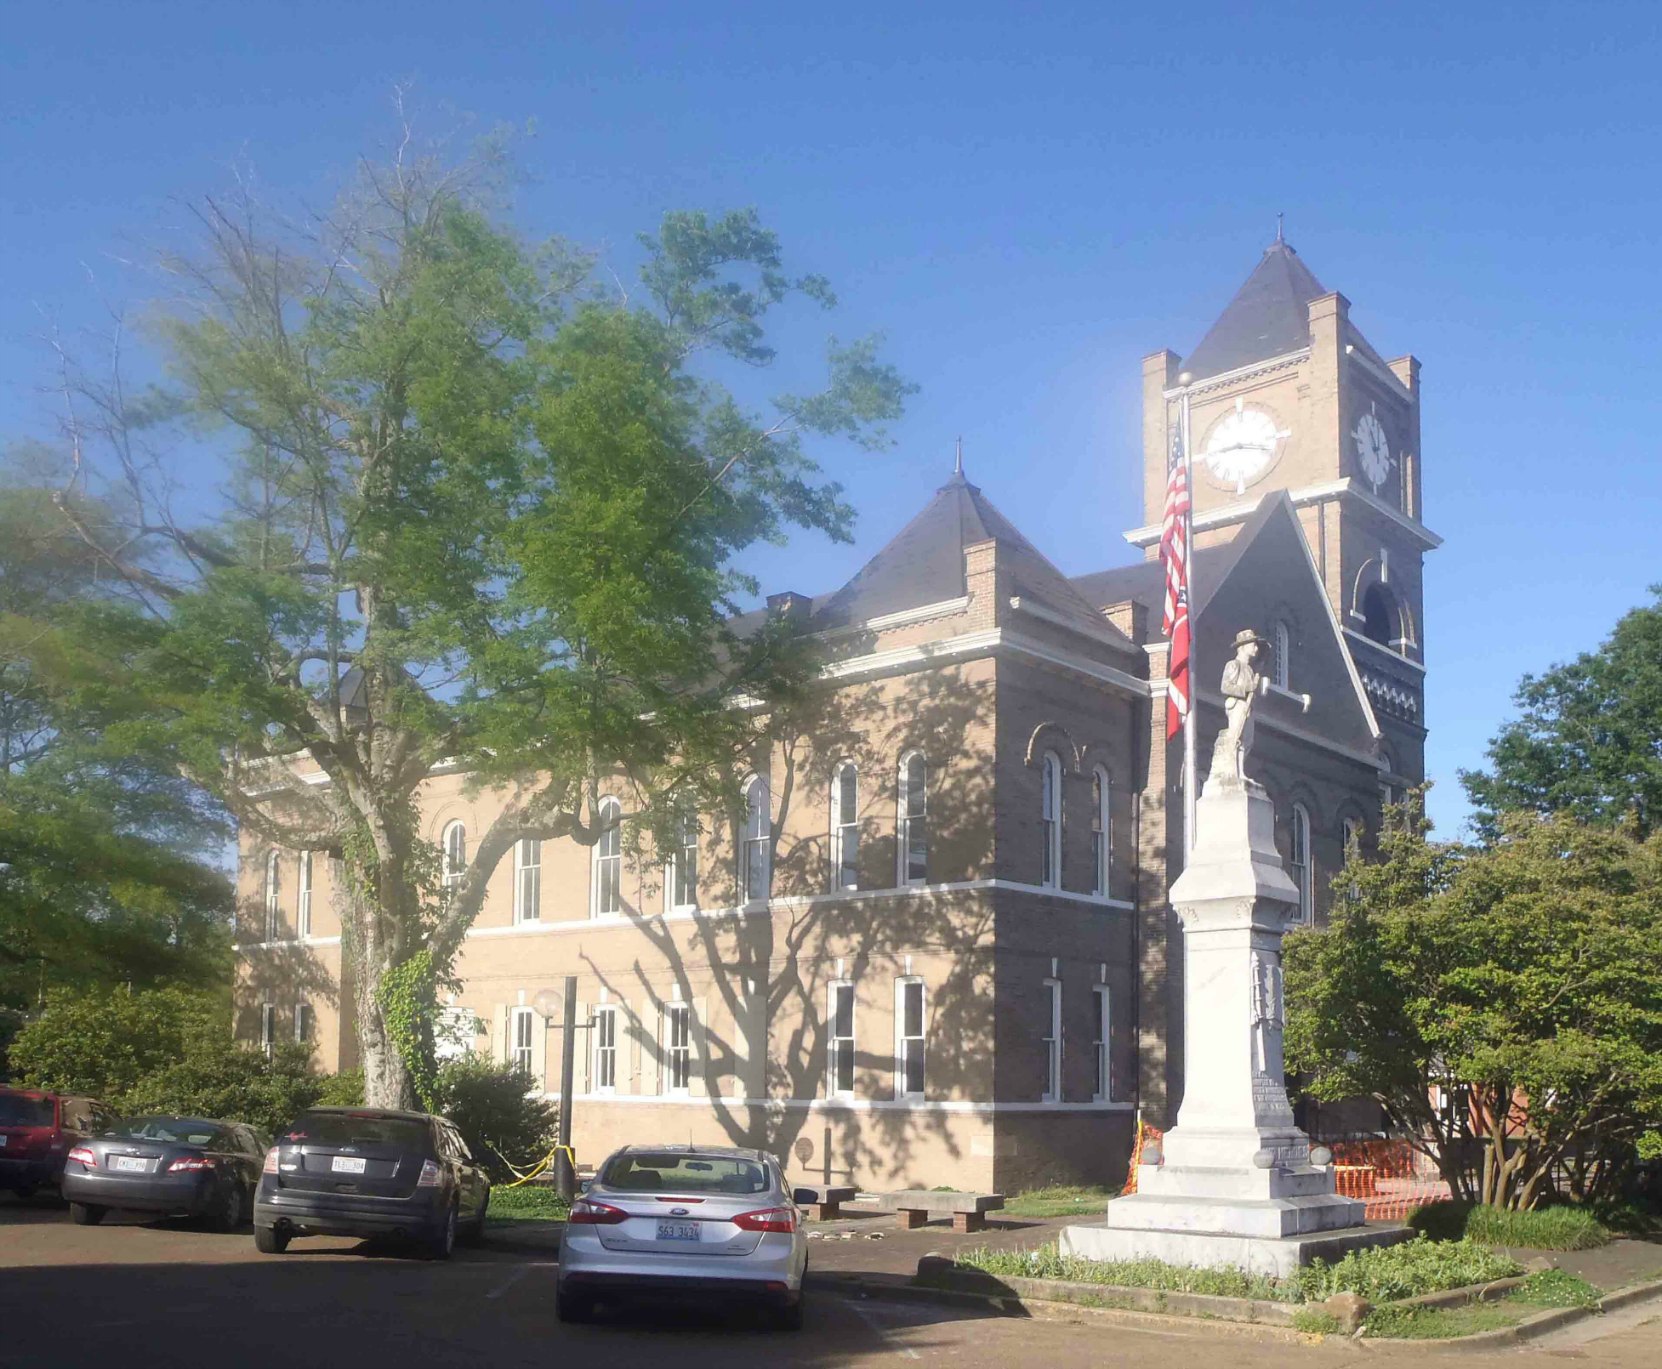 The Tallahatchie County Court House, Sumner, Mississippi